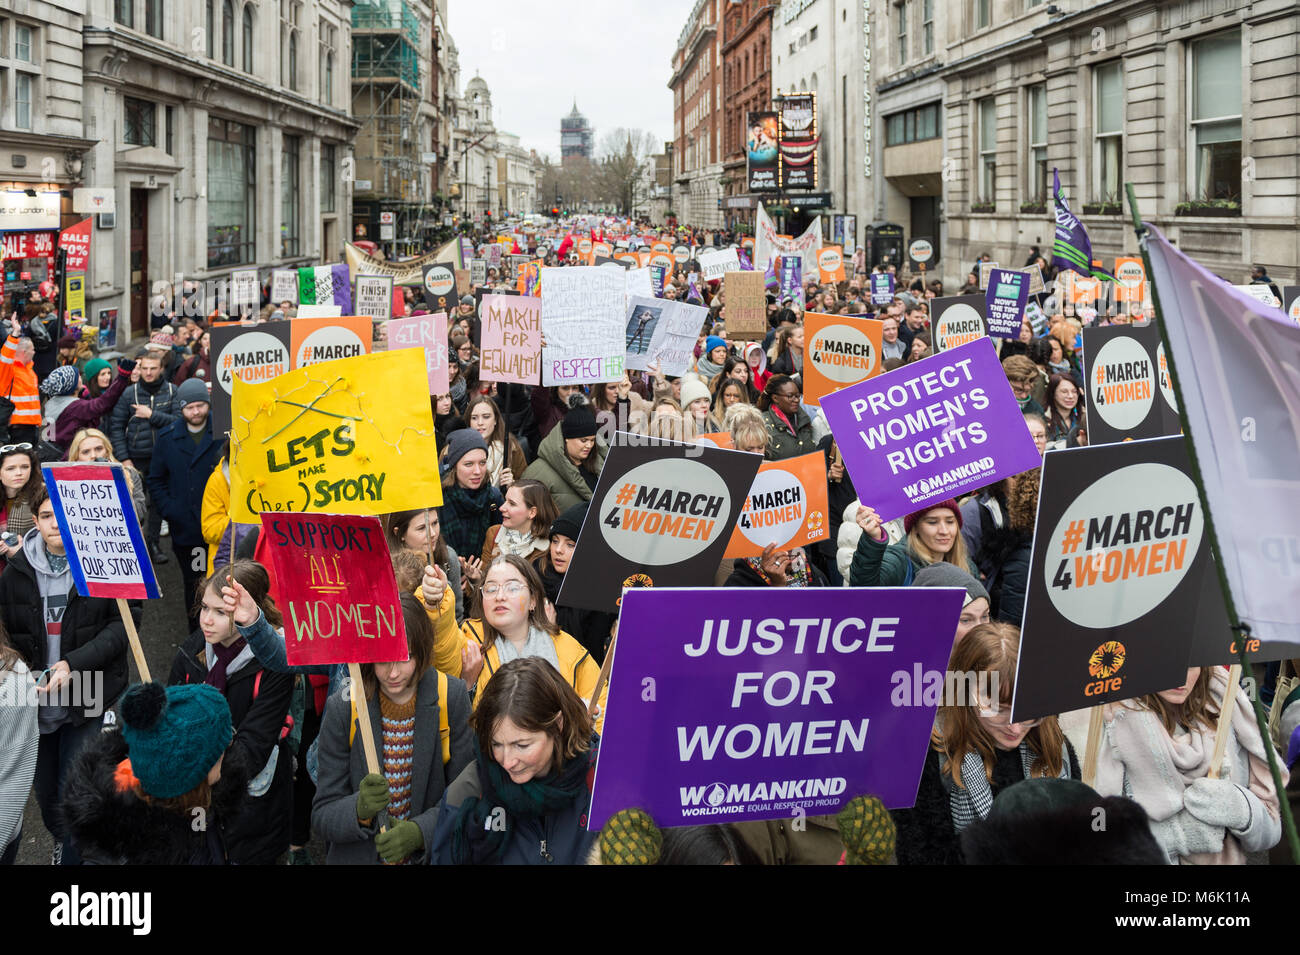 London, UK. 4th March, 2018. Thousands of people including politicians, celebrities and activists marched from the Houses of Parliament to a rally in Trafalgar Square in London during annual March4Women to mark International Women's Day and 100 years since women in the UK first gained the right to vote. The event, organised by CARE International, aims to highlight inequality faced by women and girls around the world and campaign for gender equality and women's rights worldwide. Credit: Wiktor Szymanowicz/Alamy Live News Stock Photo